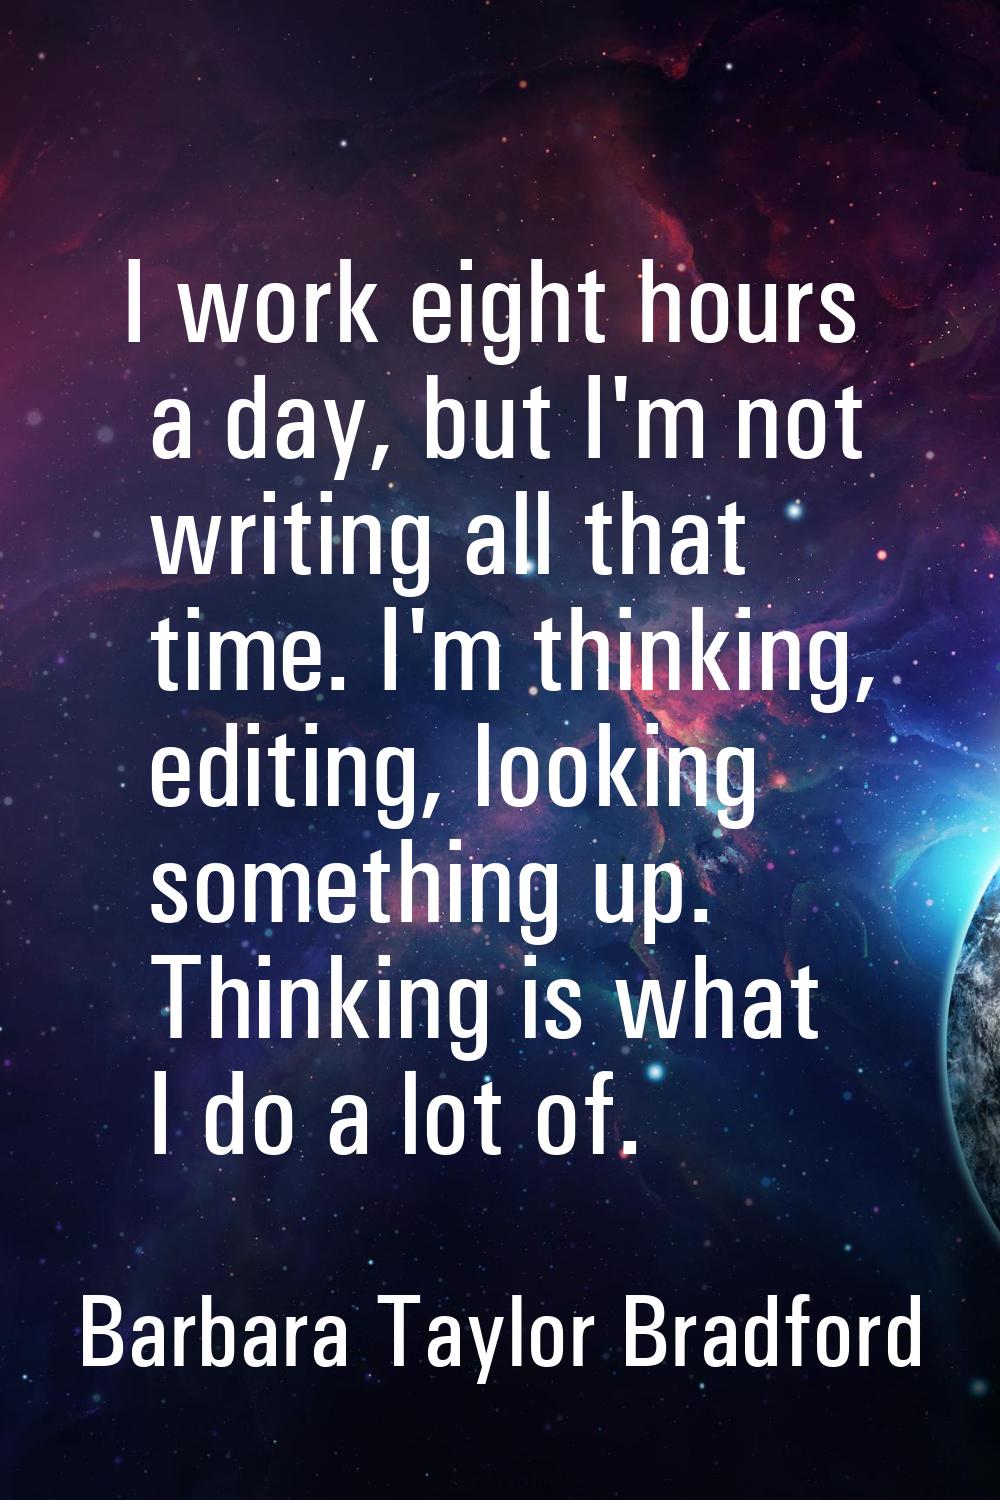 I work eight hours a day, but I'm not writing all that time. I'm thinking, editing, looking somethi